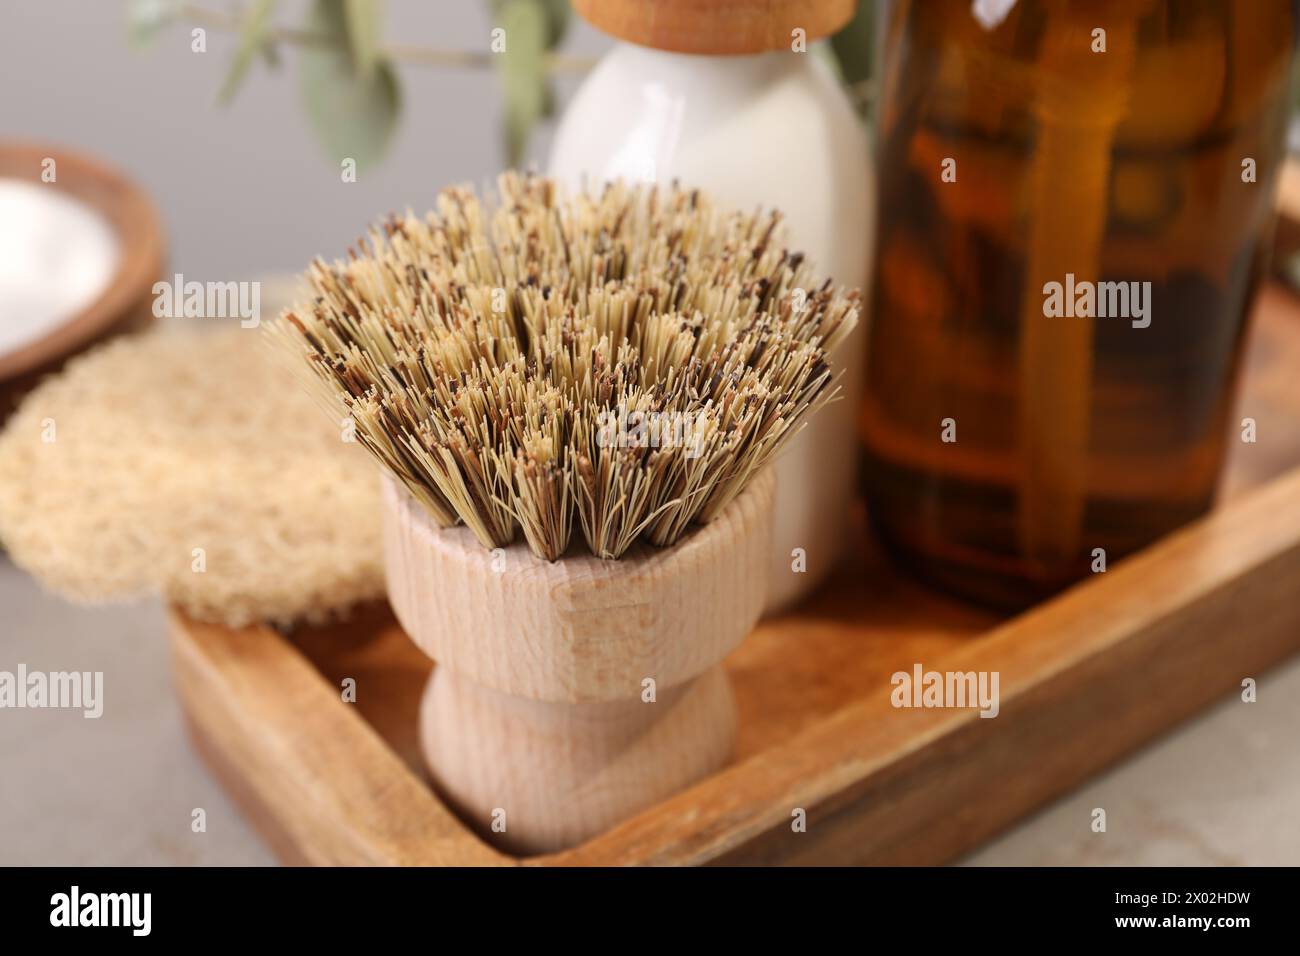 Cleaning brush, bottles and sponge on table, closeup Stock Photo